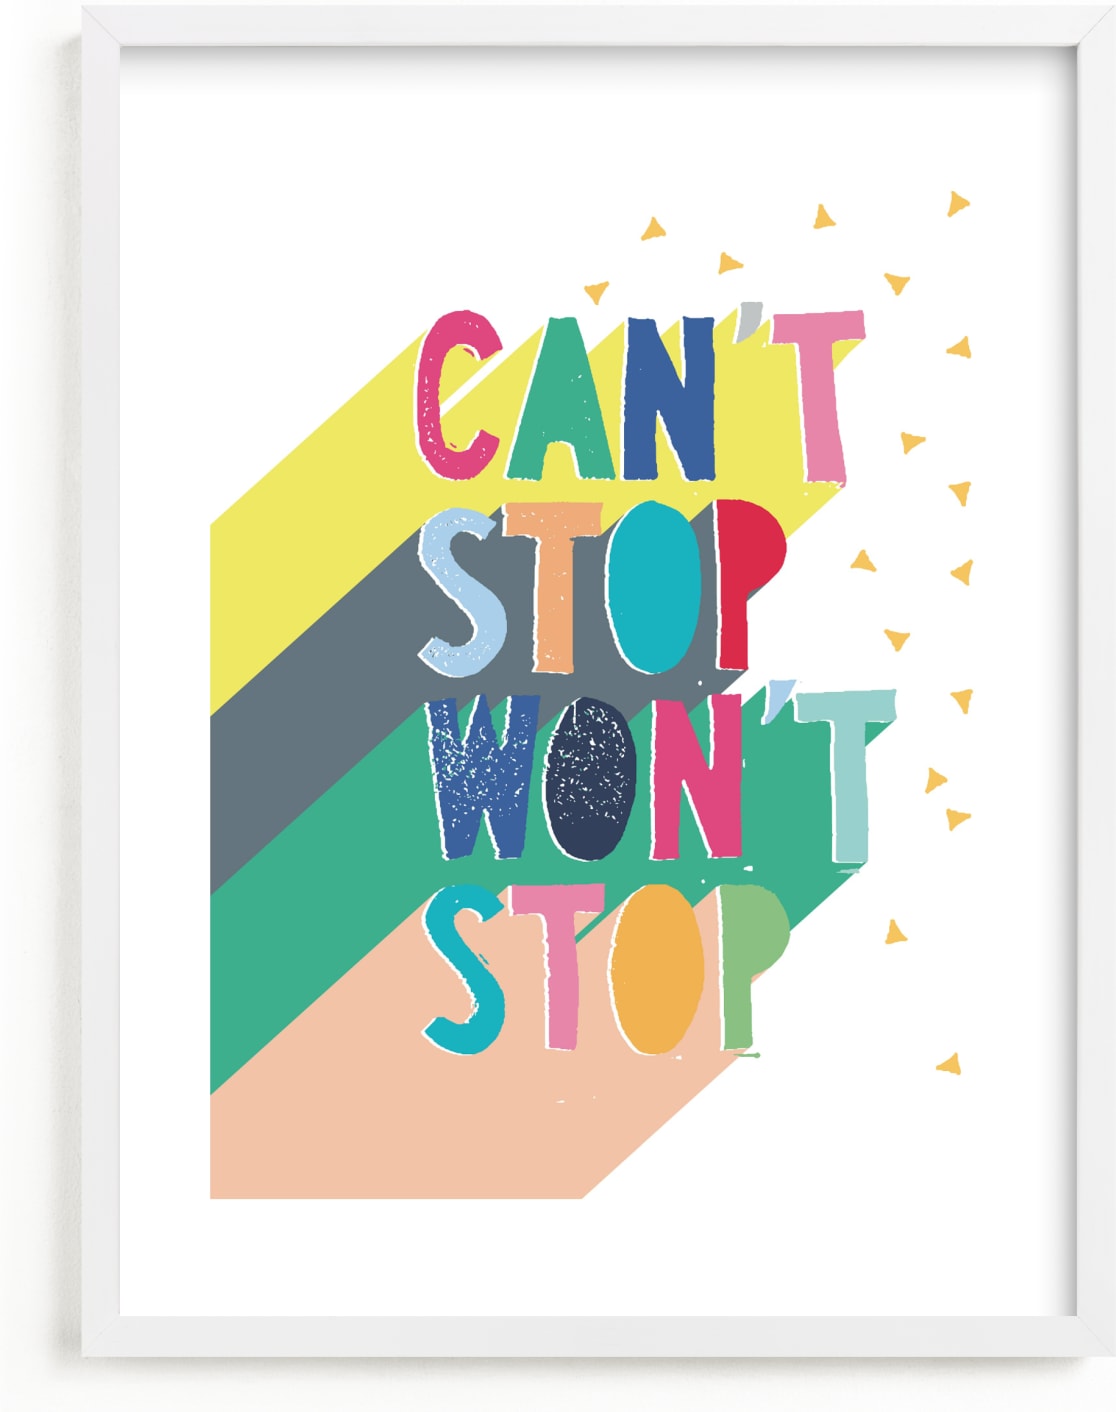 This is a colorful kids wall art by Katy Clemmans called Can't Stop.